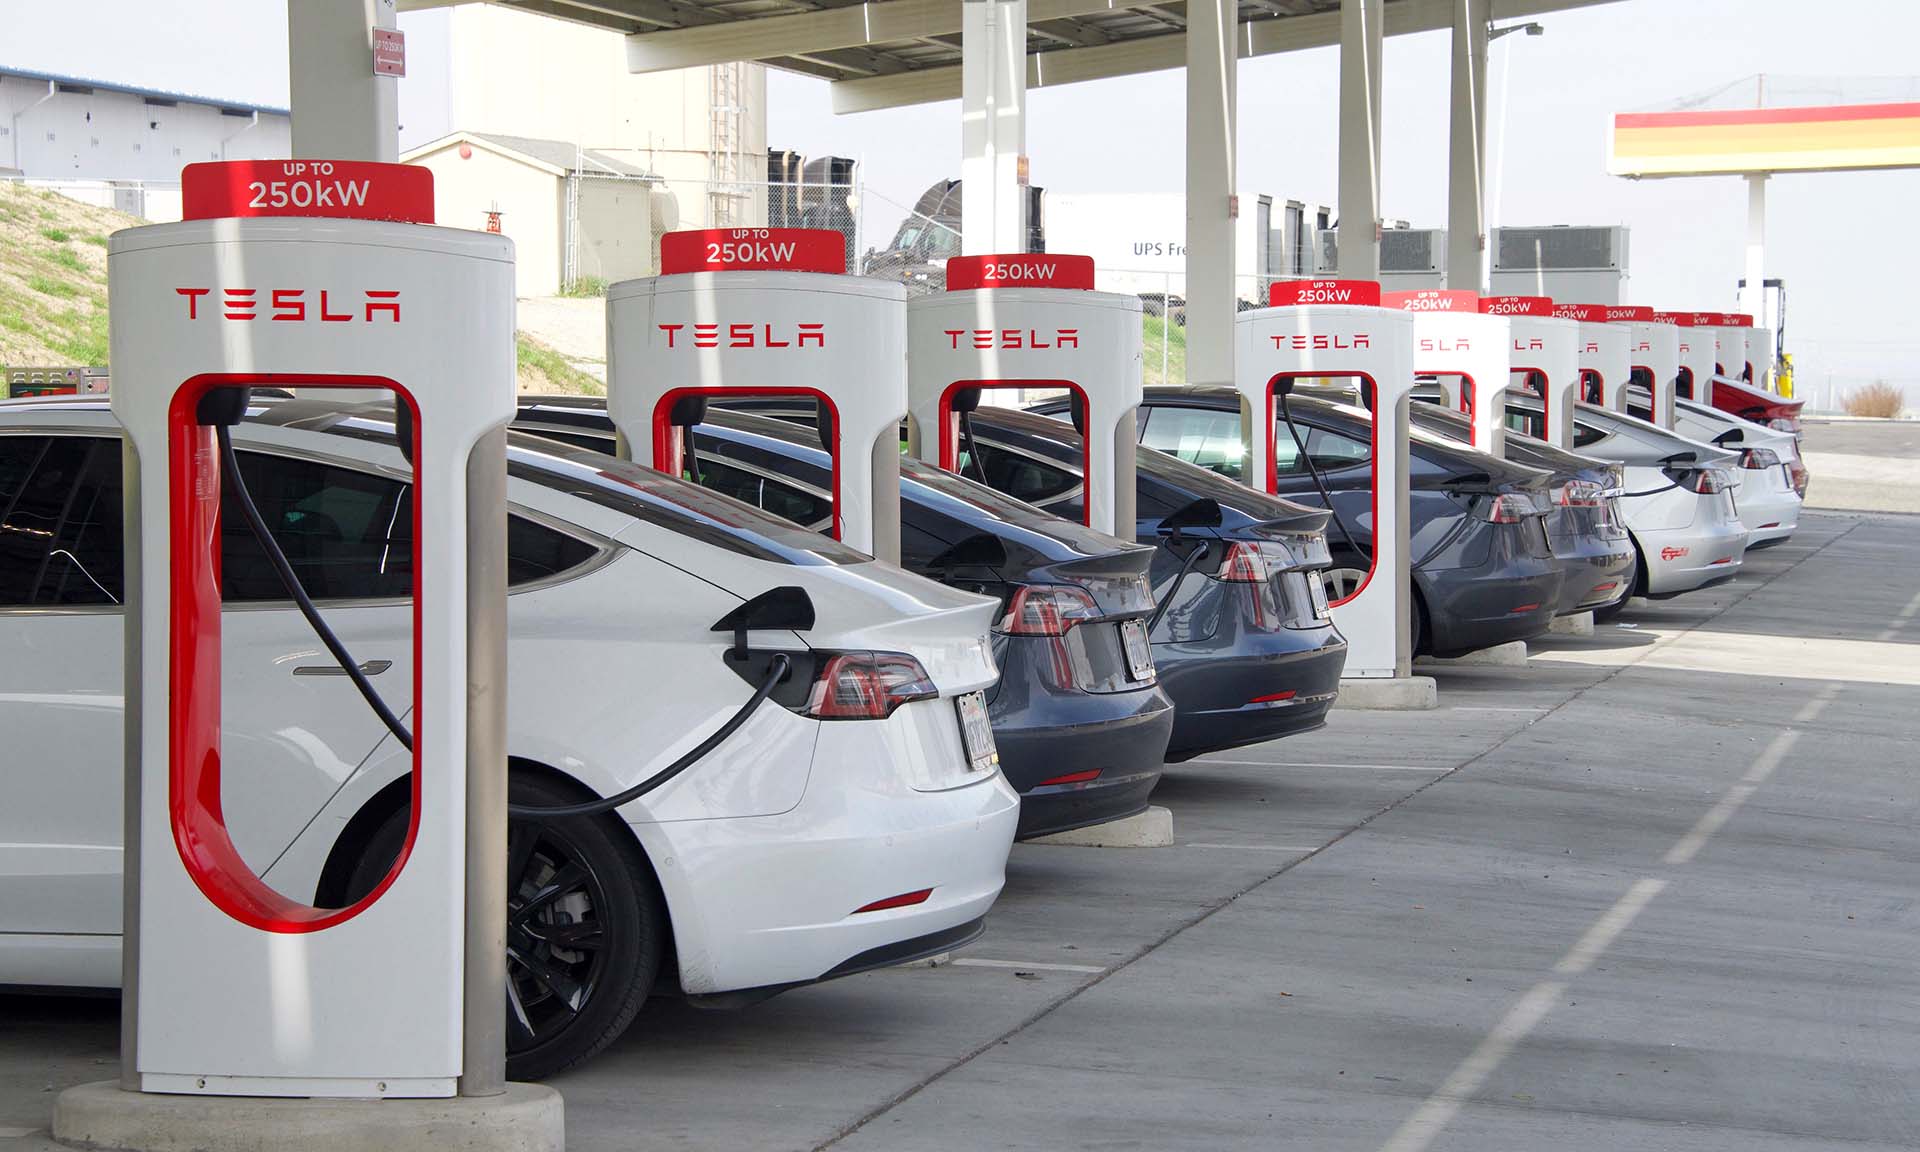 Many cars charging at a Tesla Supercharger station. Supercharger stations allow Tesla cars to be fast-charged at the network within a hour.